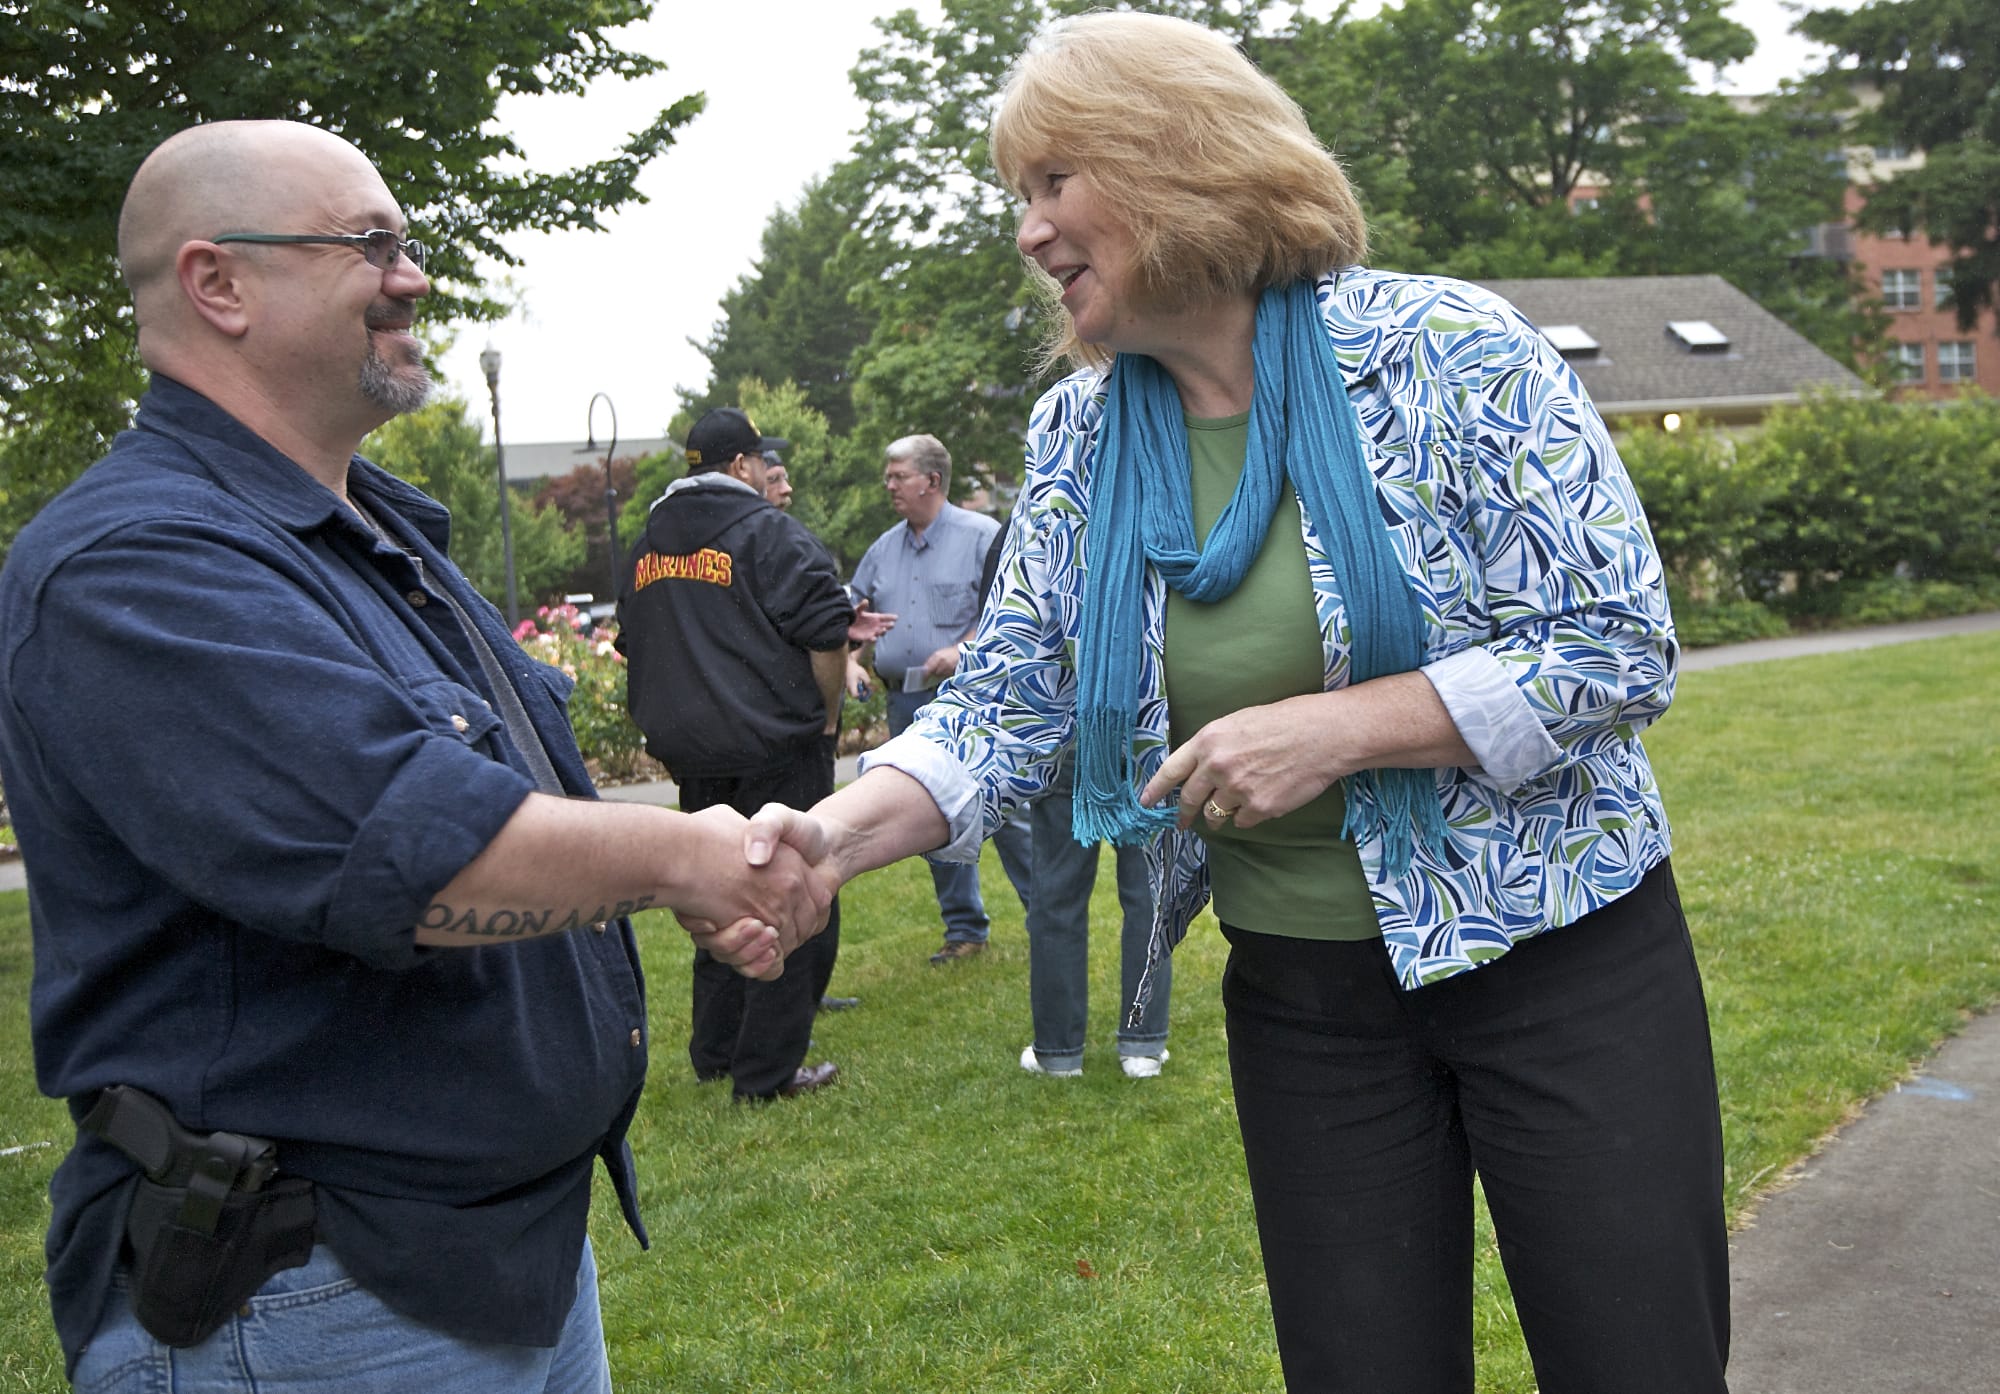 Open-carry gun activist Larry White and gun safety advocate and Vancouver City Councilwoman Anne McEnerny-Ogle shake hands as the two groups hold their separate rallies at Esther Short Park on Tuesday. McEnerny-Ogle was one of the few people who crossed camps to interact with the other group.